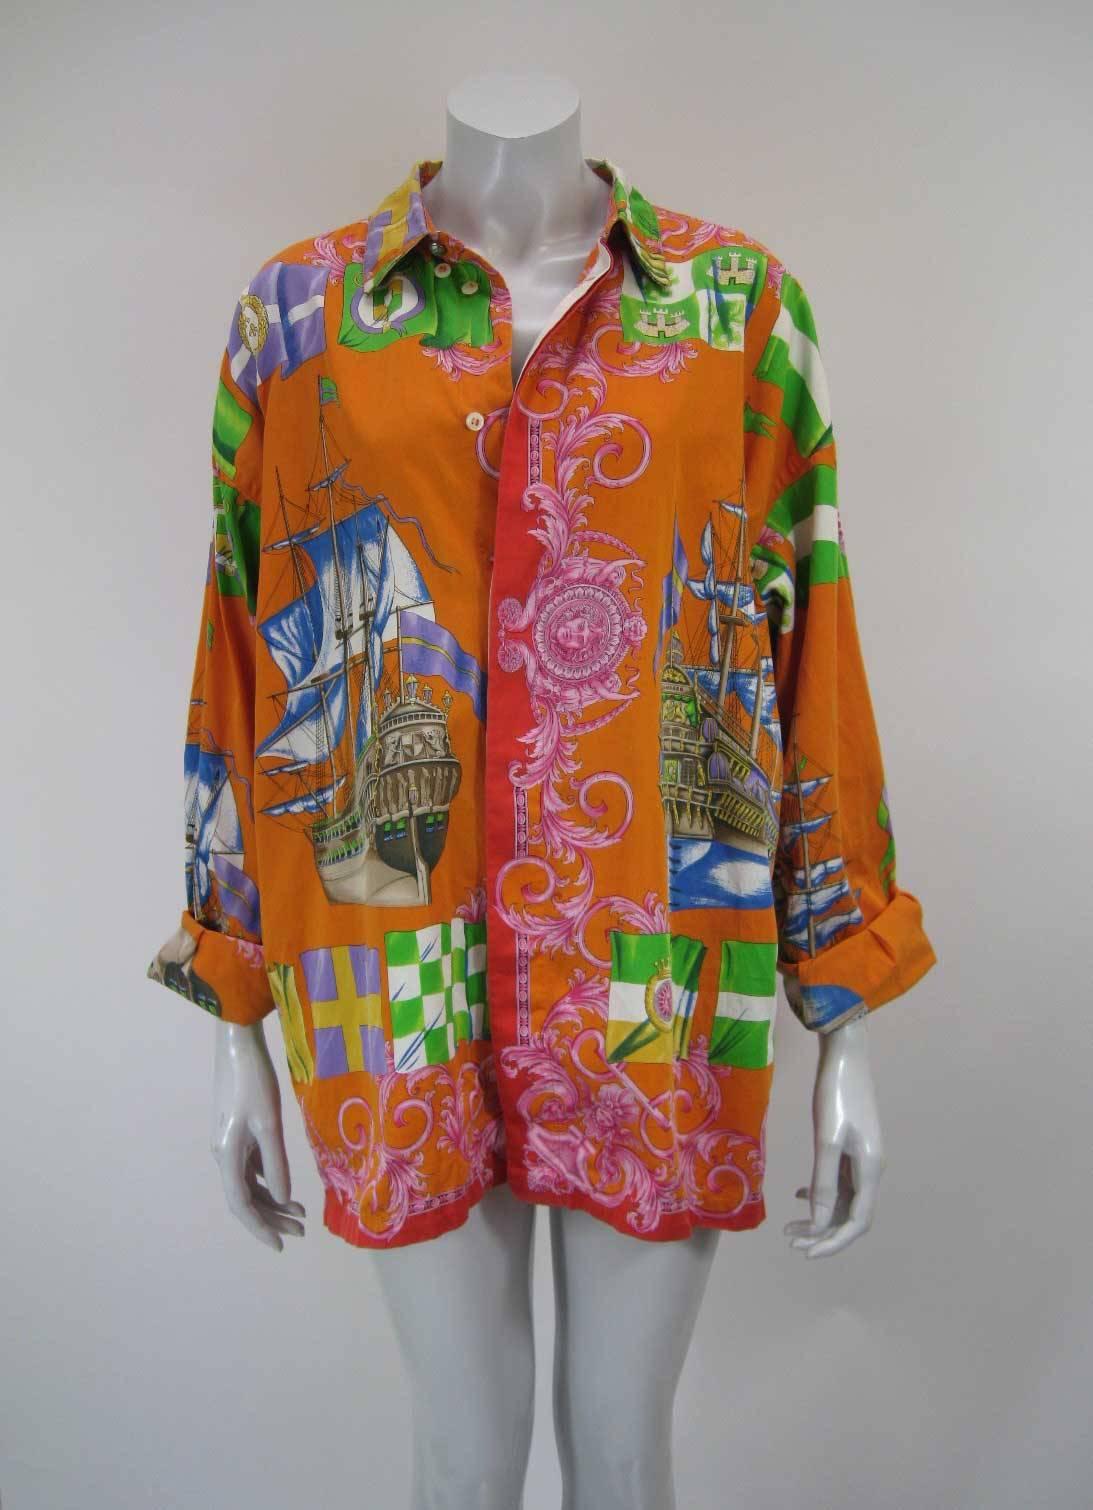 Gianni Versace Printed Sailboat Suns Motif Shirt In Good Condition For Sale In Oakland, CA